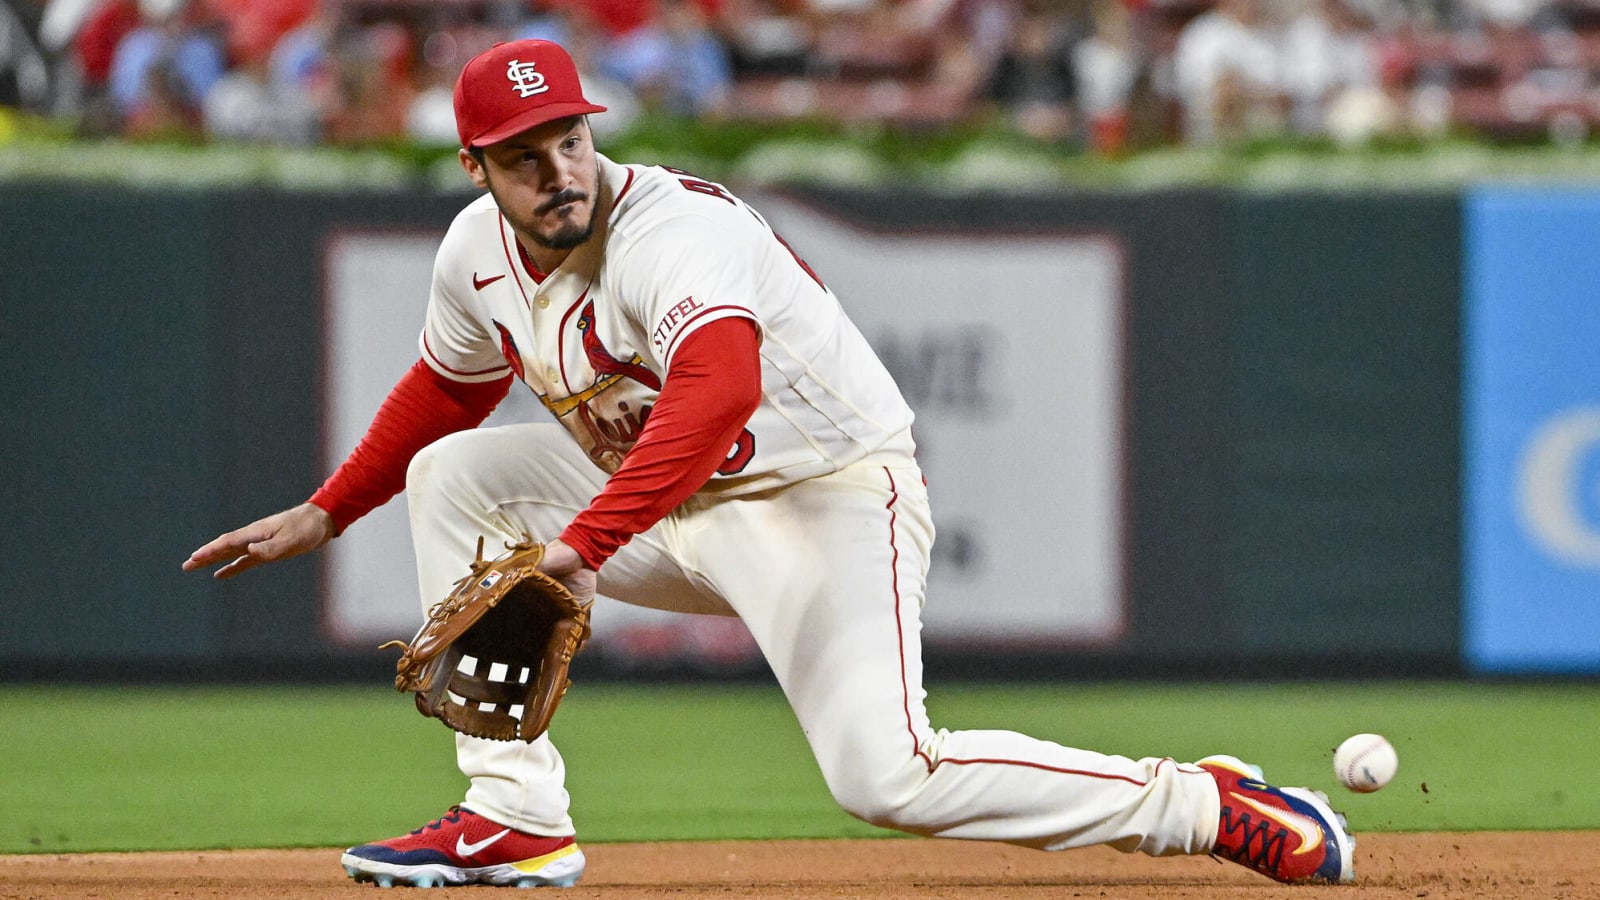 Improving Cardinals pitching requires upgrade at catcher too